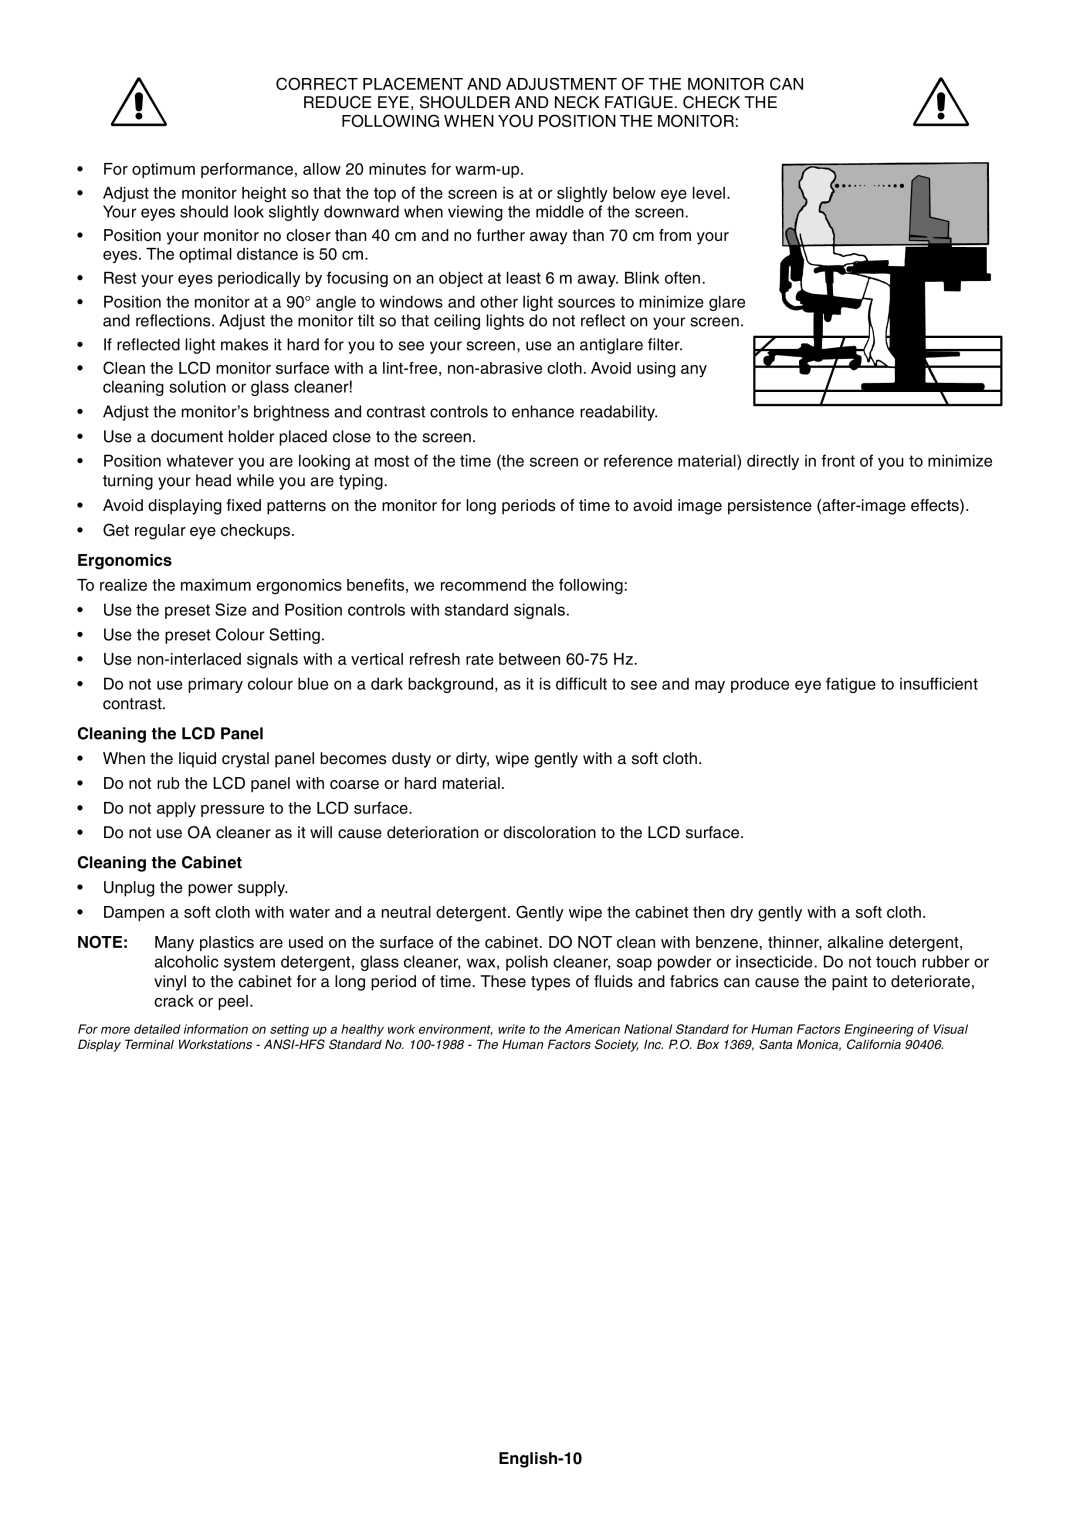 NEC LCD203WM, LCD223WM, LCD193WM user manual Ergonomics, Cleaning the LCD Panel, Cleaning the Cabinet, English-10 